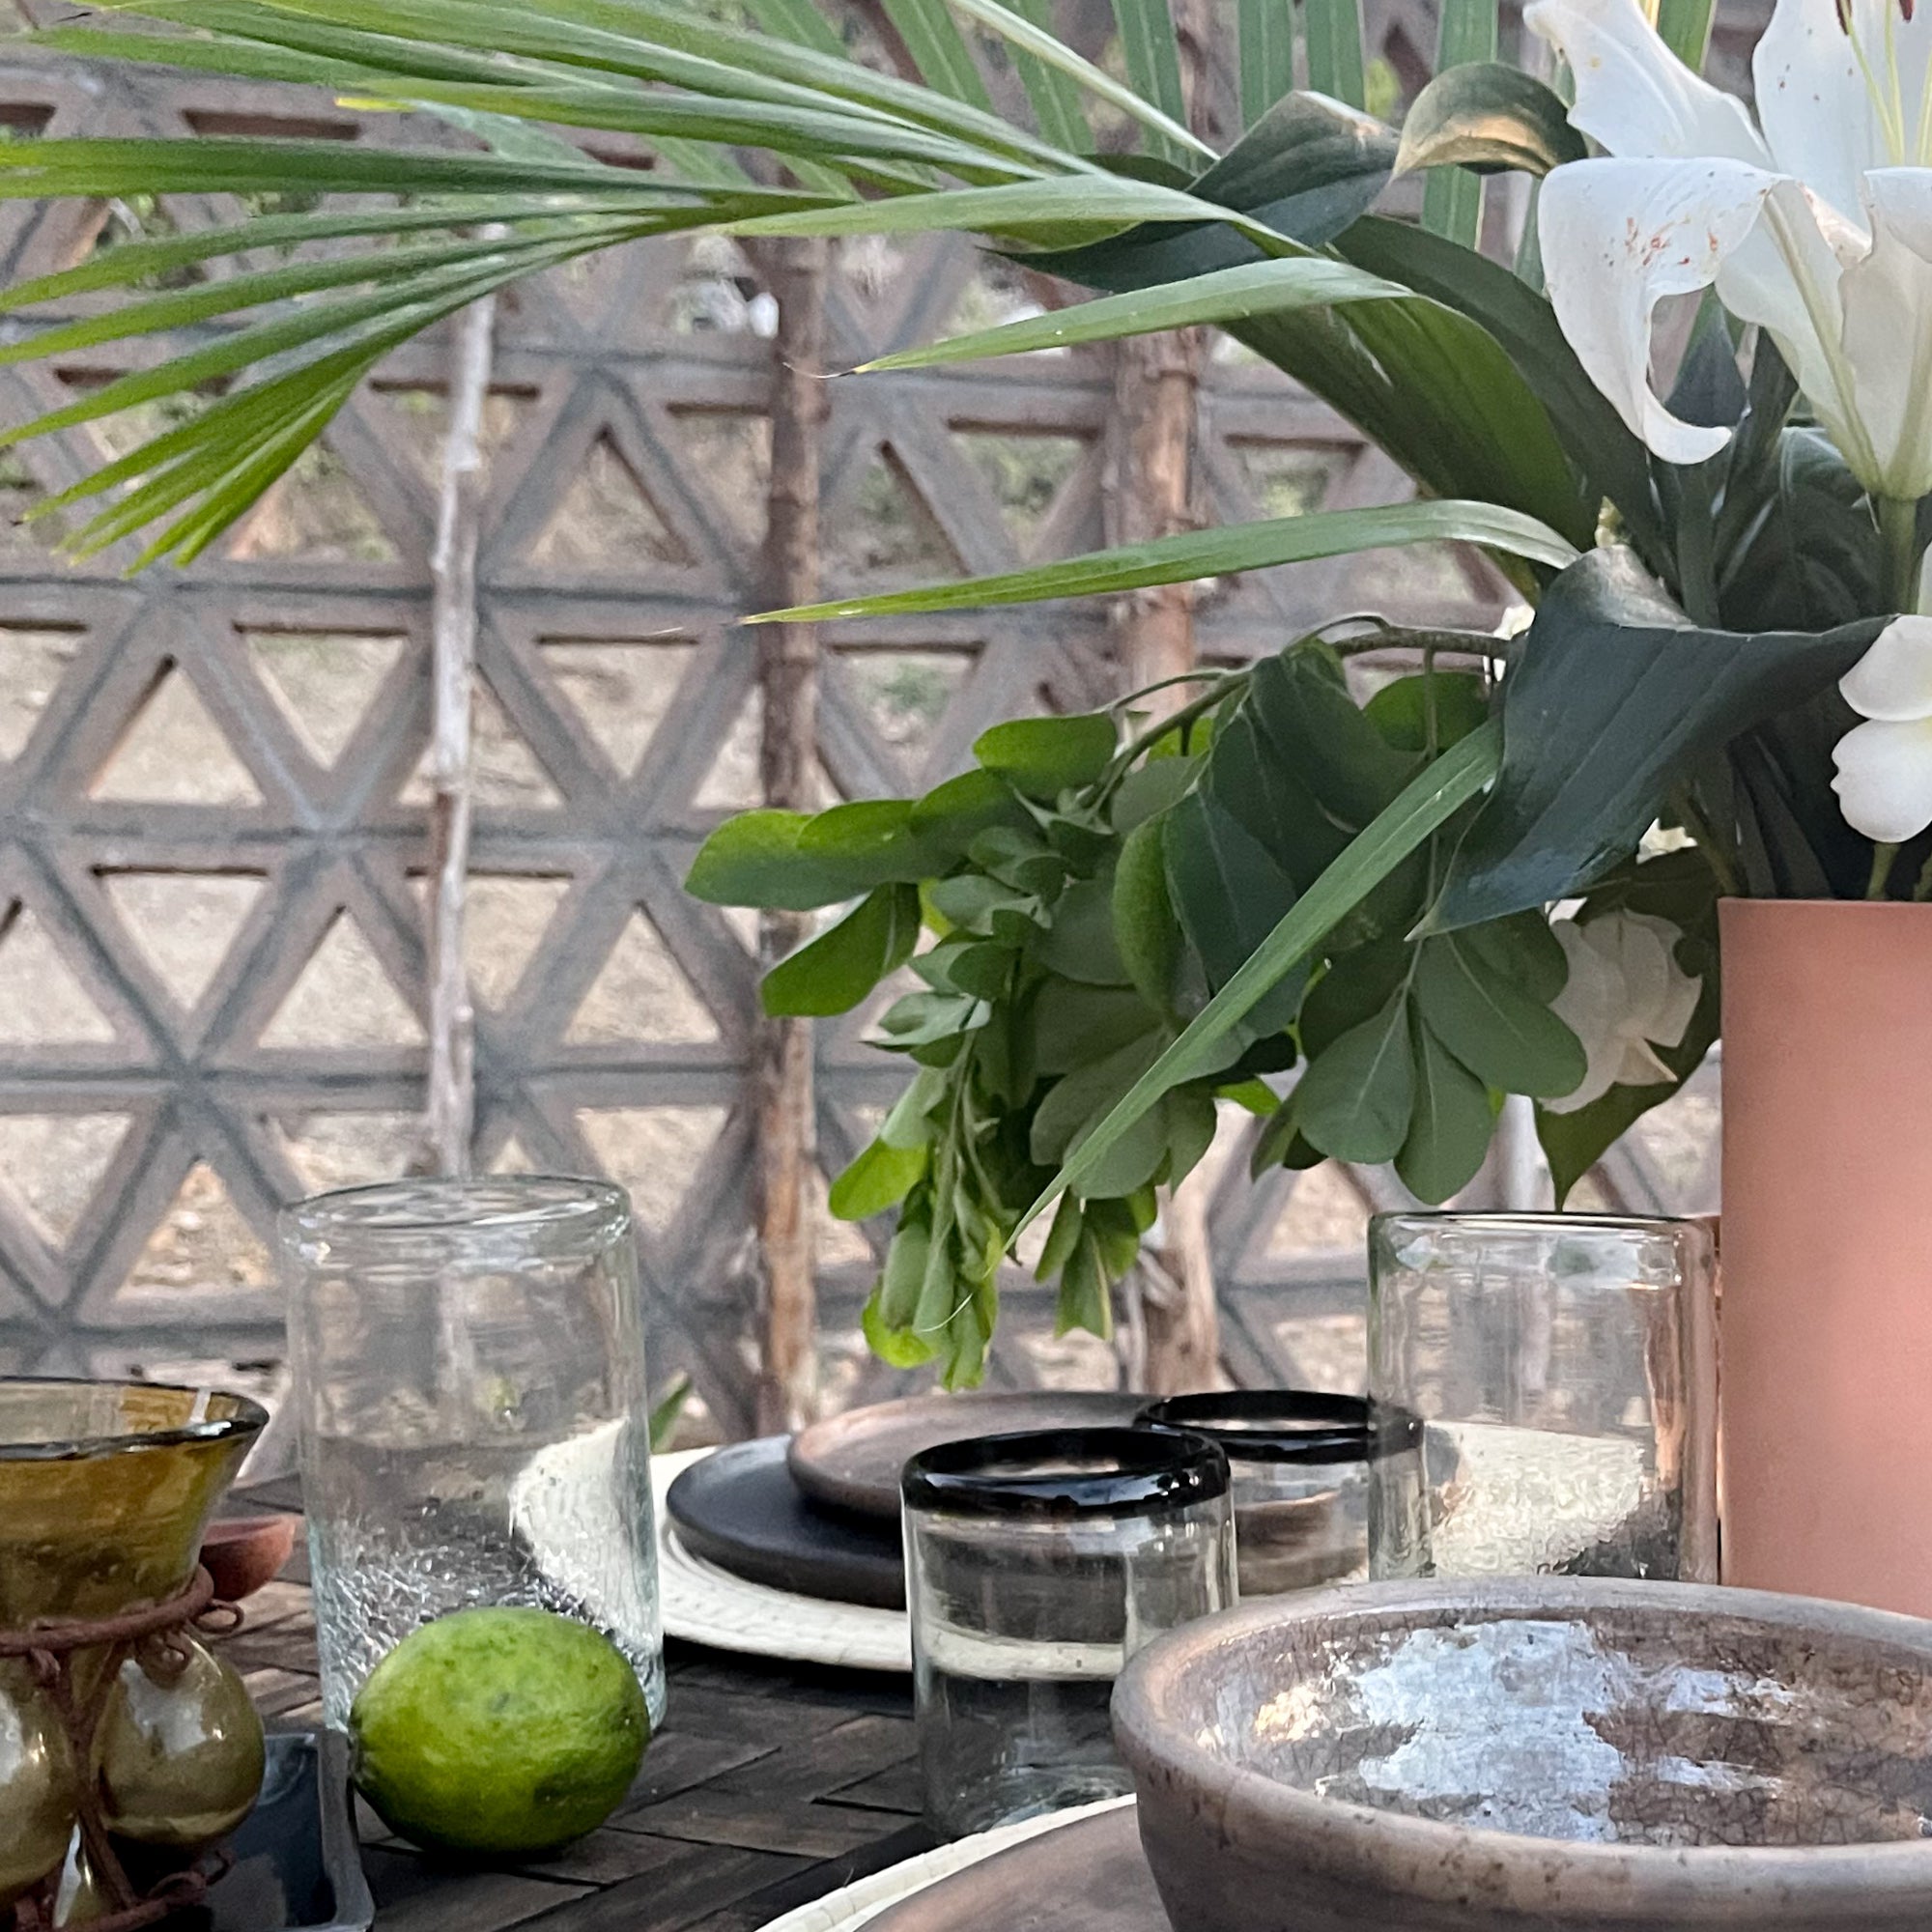 A table set with black rimmed glassware, and Oaxaca clay dishes, a vase with flowers and limes.